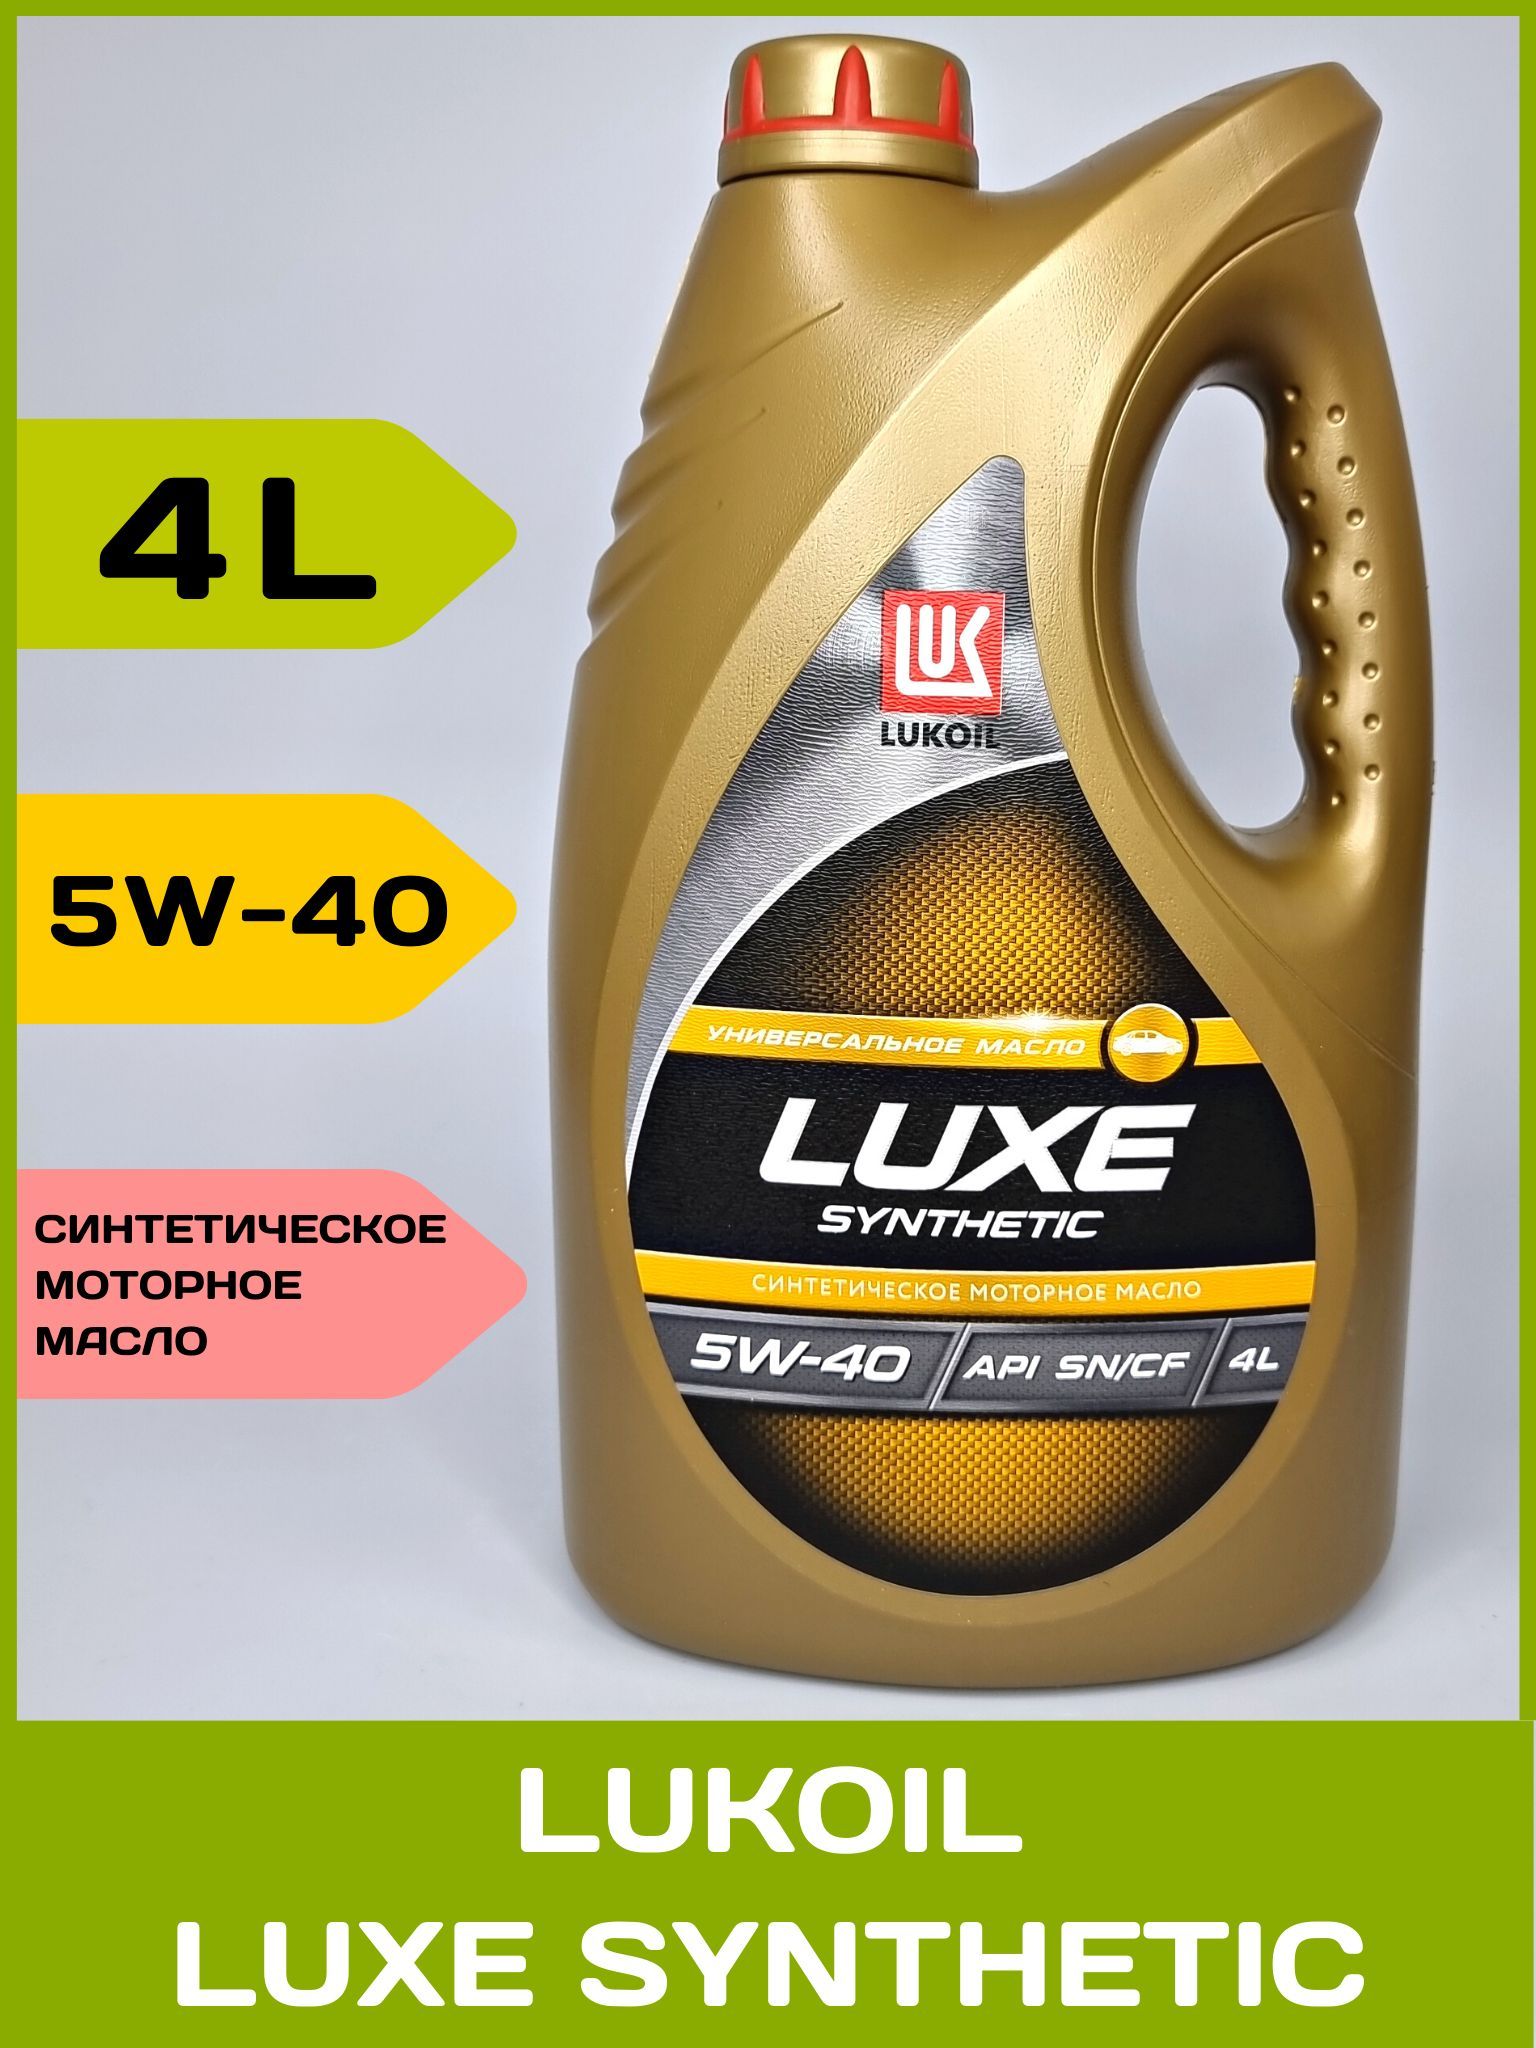 Моторное масло лукойл люкс отзывы. Lukoil Luxe Synthetic 5w-30. Автомасло Лукойл Люкс моторное 5w-40 синтетика. Luxe Synthetic SL/CF 5w-30. Лукойл Люкс 5w30 синтетика 5л.